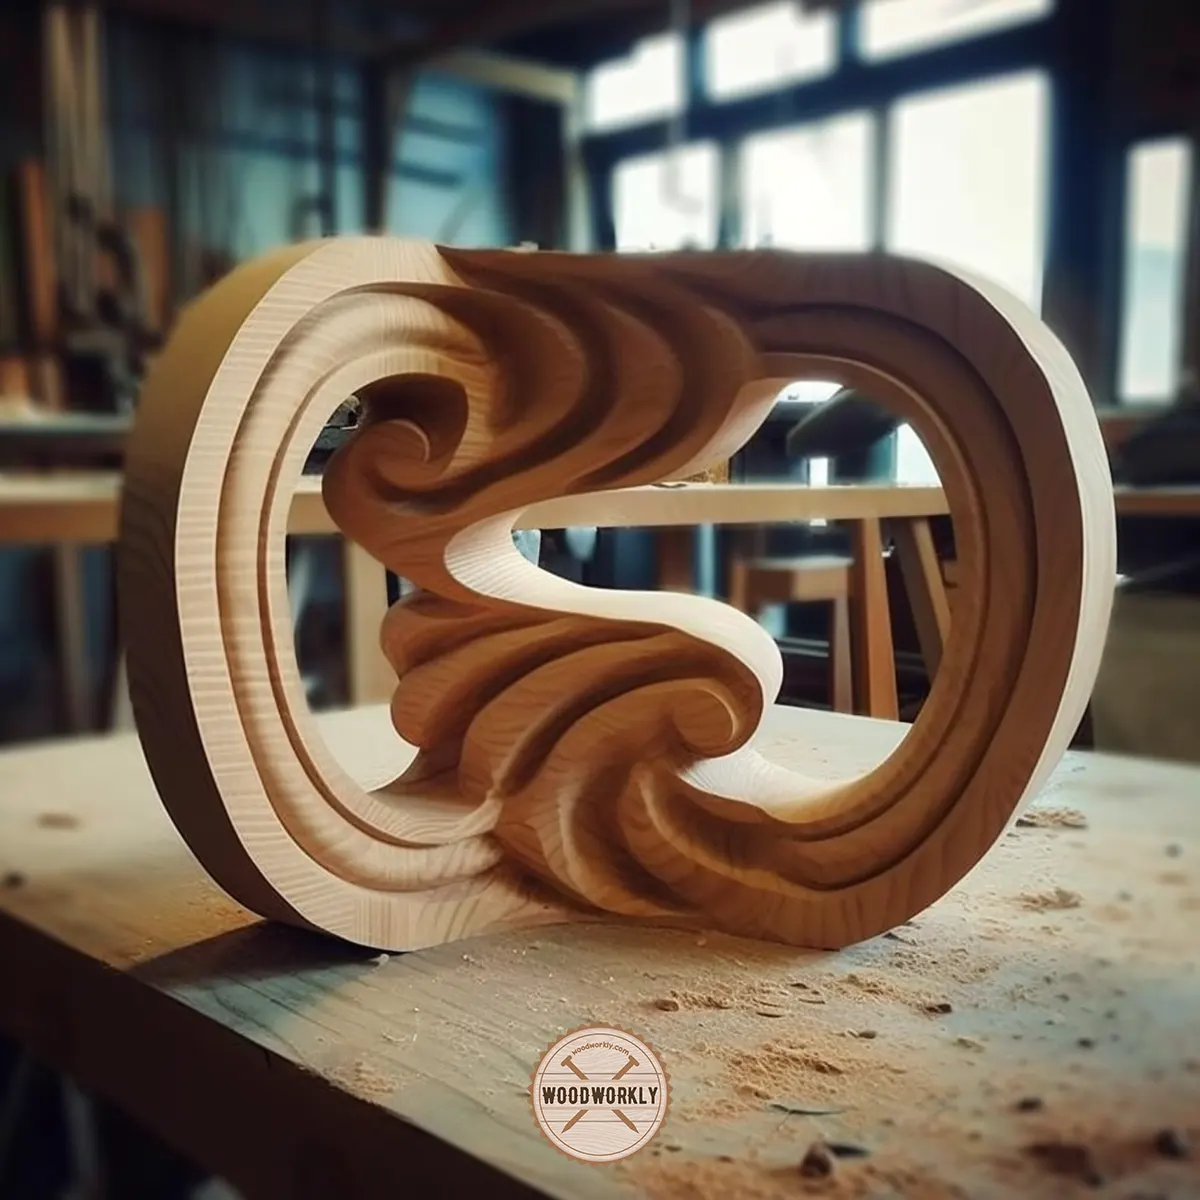 Decorate item made by bending thick wood